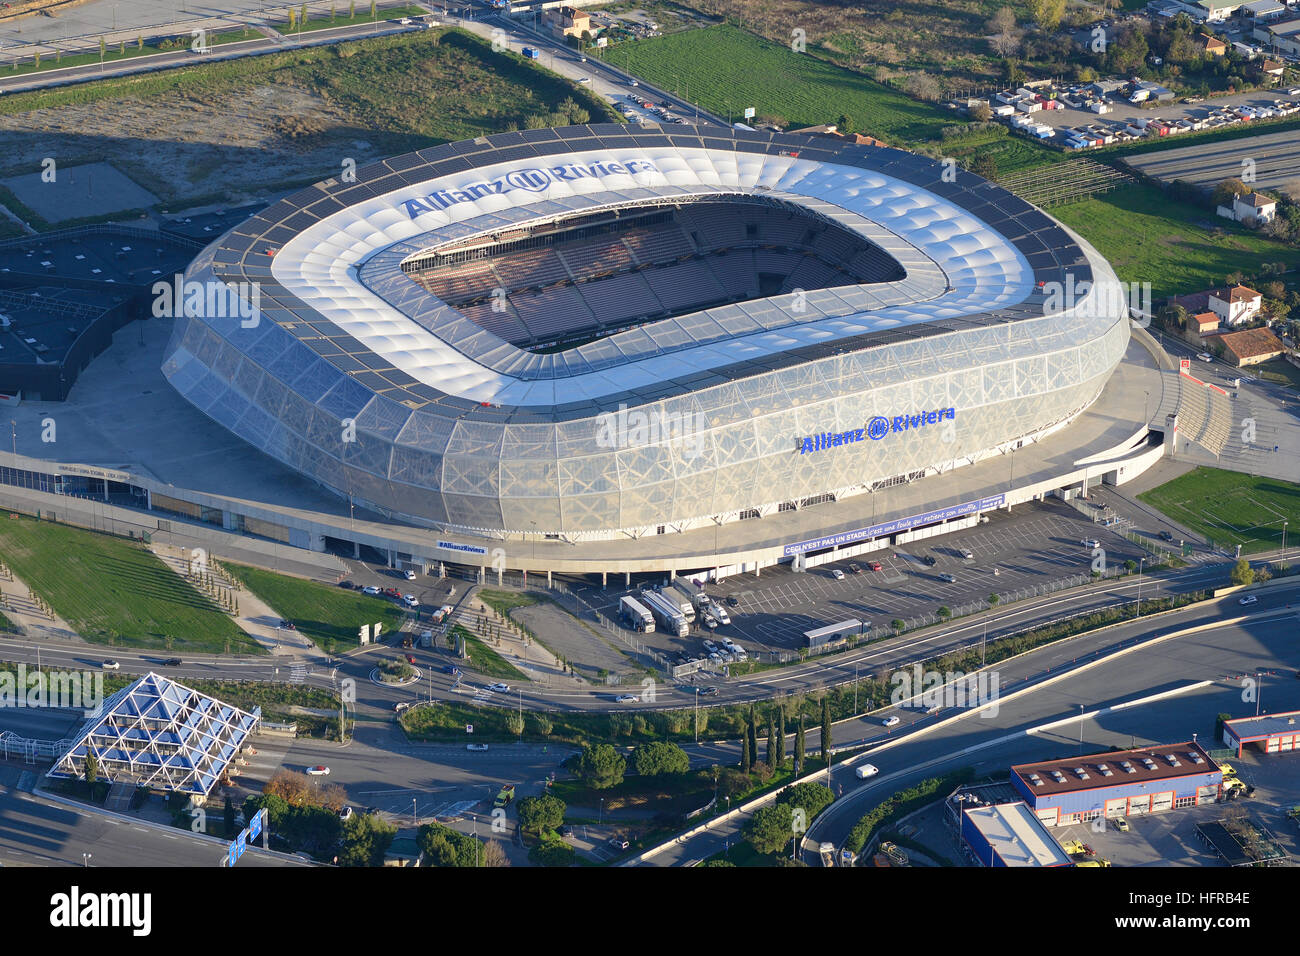 AERIAL VIEW. Allianz Riviera Stadium; a large (capacity of 45,000) multi-use arena built in 2013. Nice, Alpes-Maritimes, France. Stock Photo